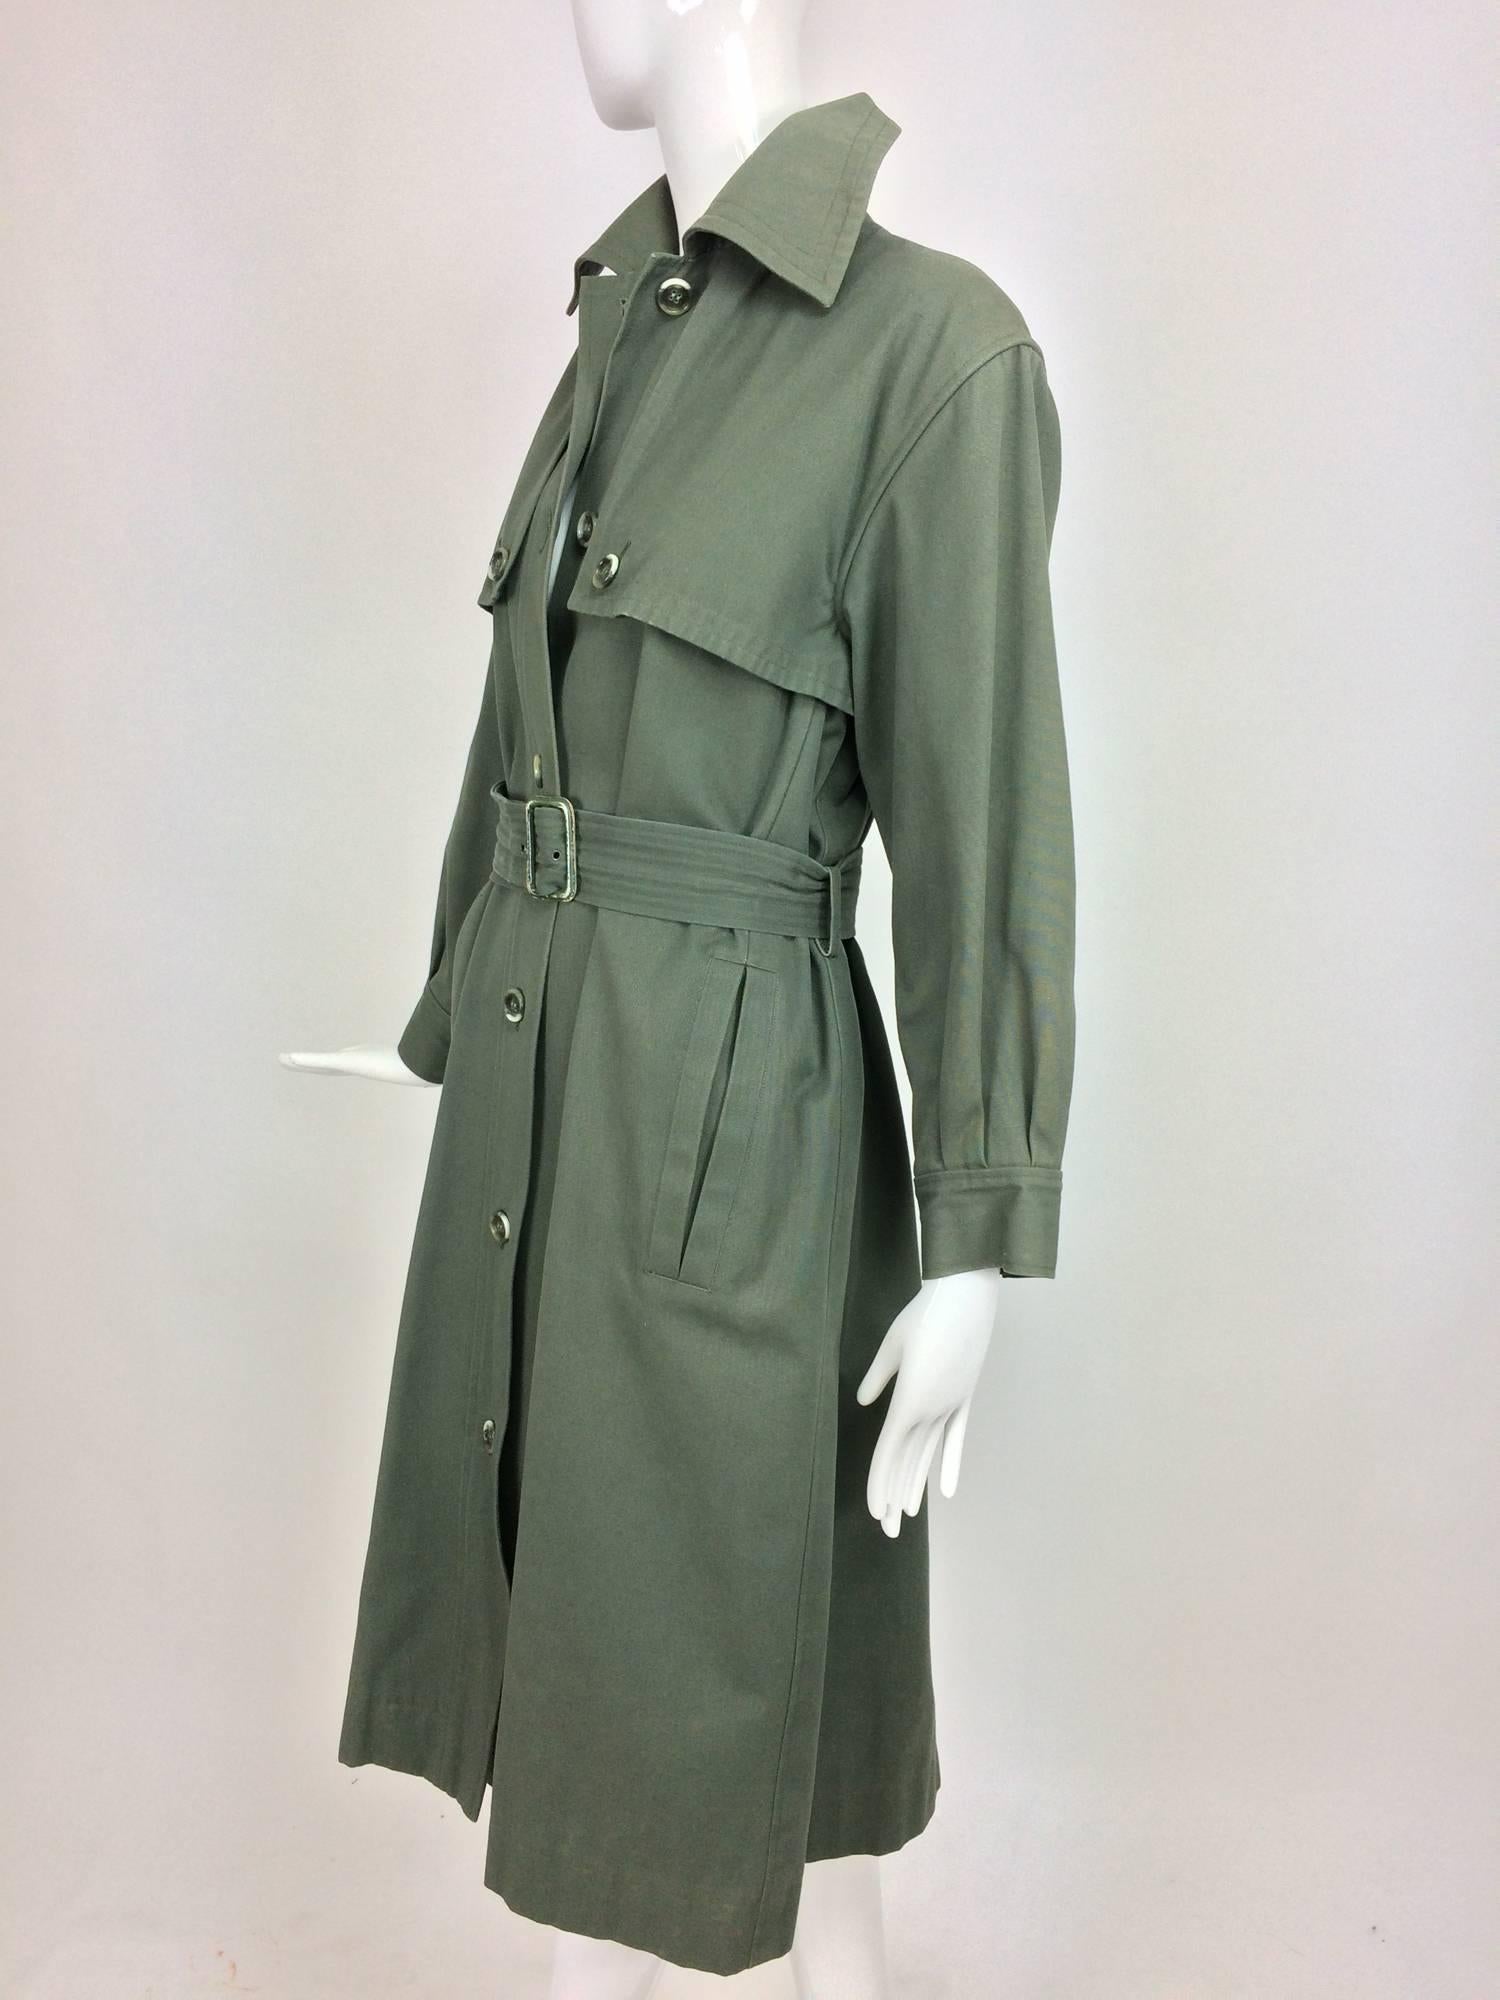 Vintage rare Yves St Laurent military green canvas trench coat 1970s 1